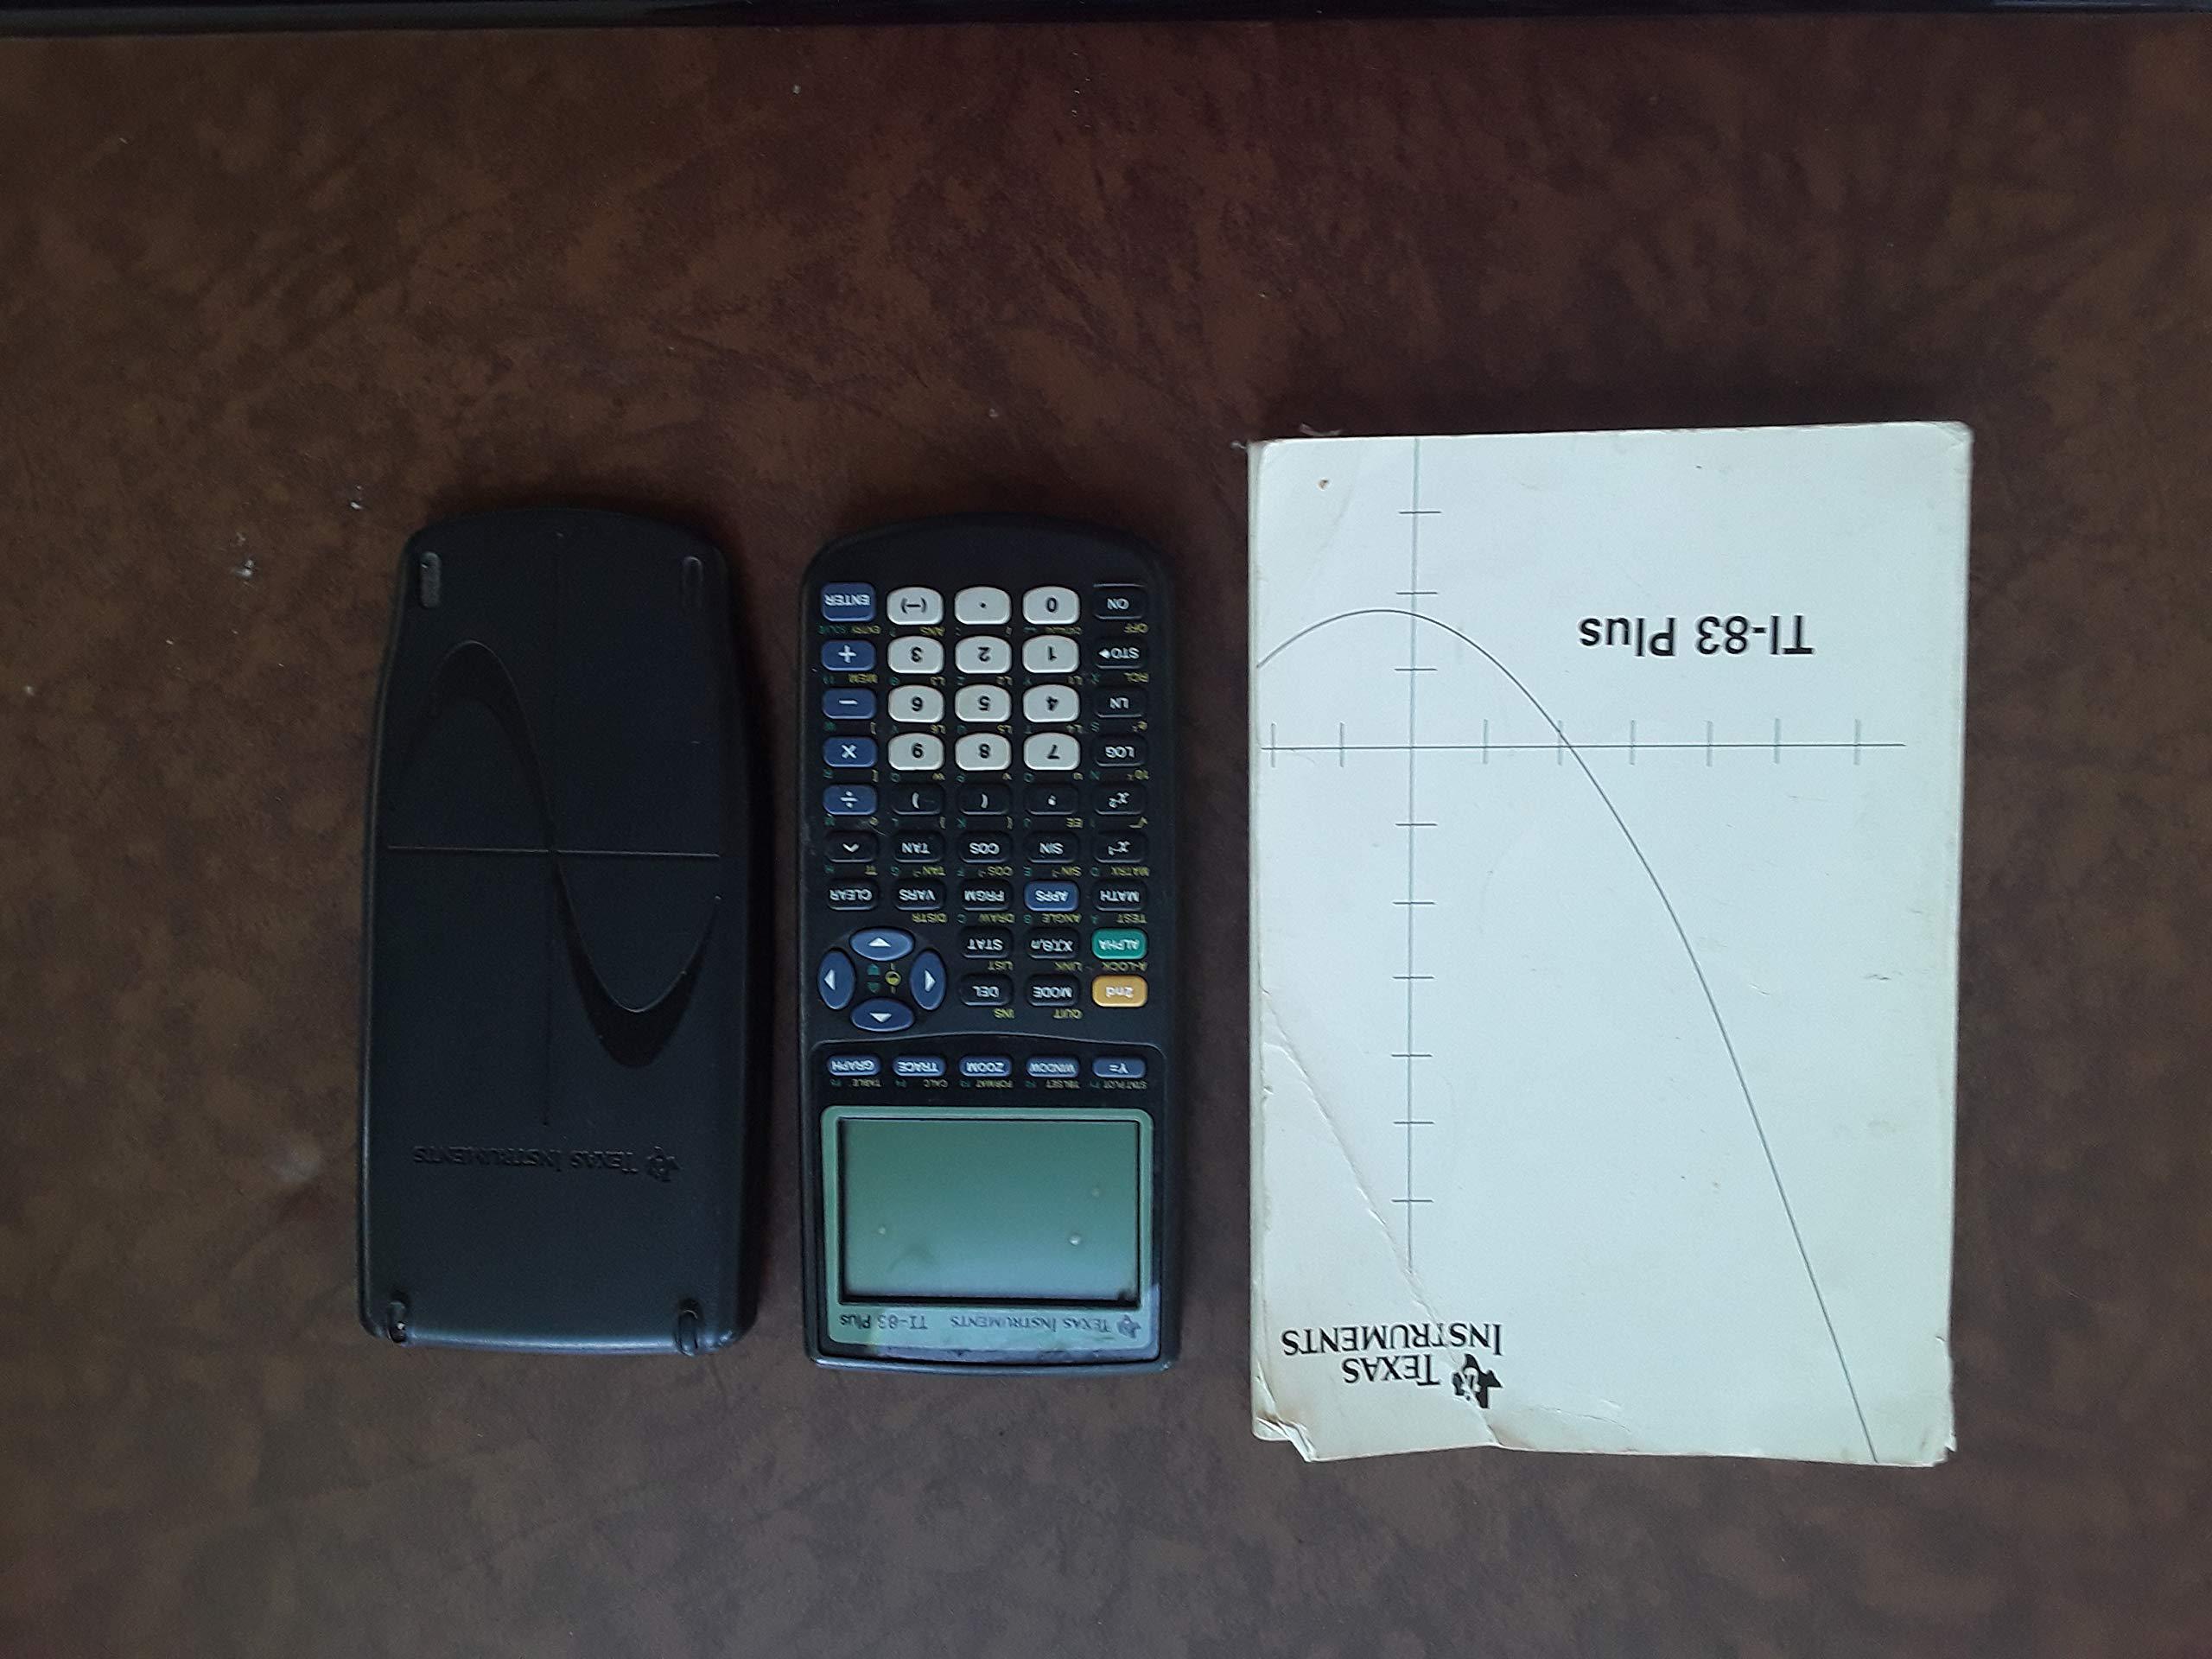 texas instruments ti-83 plus graphing calculator and ti-83 user's manual